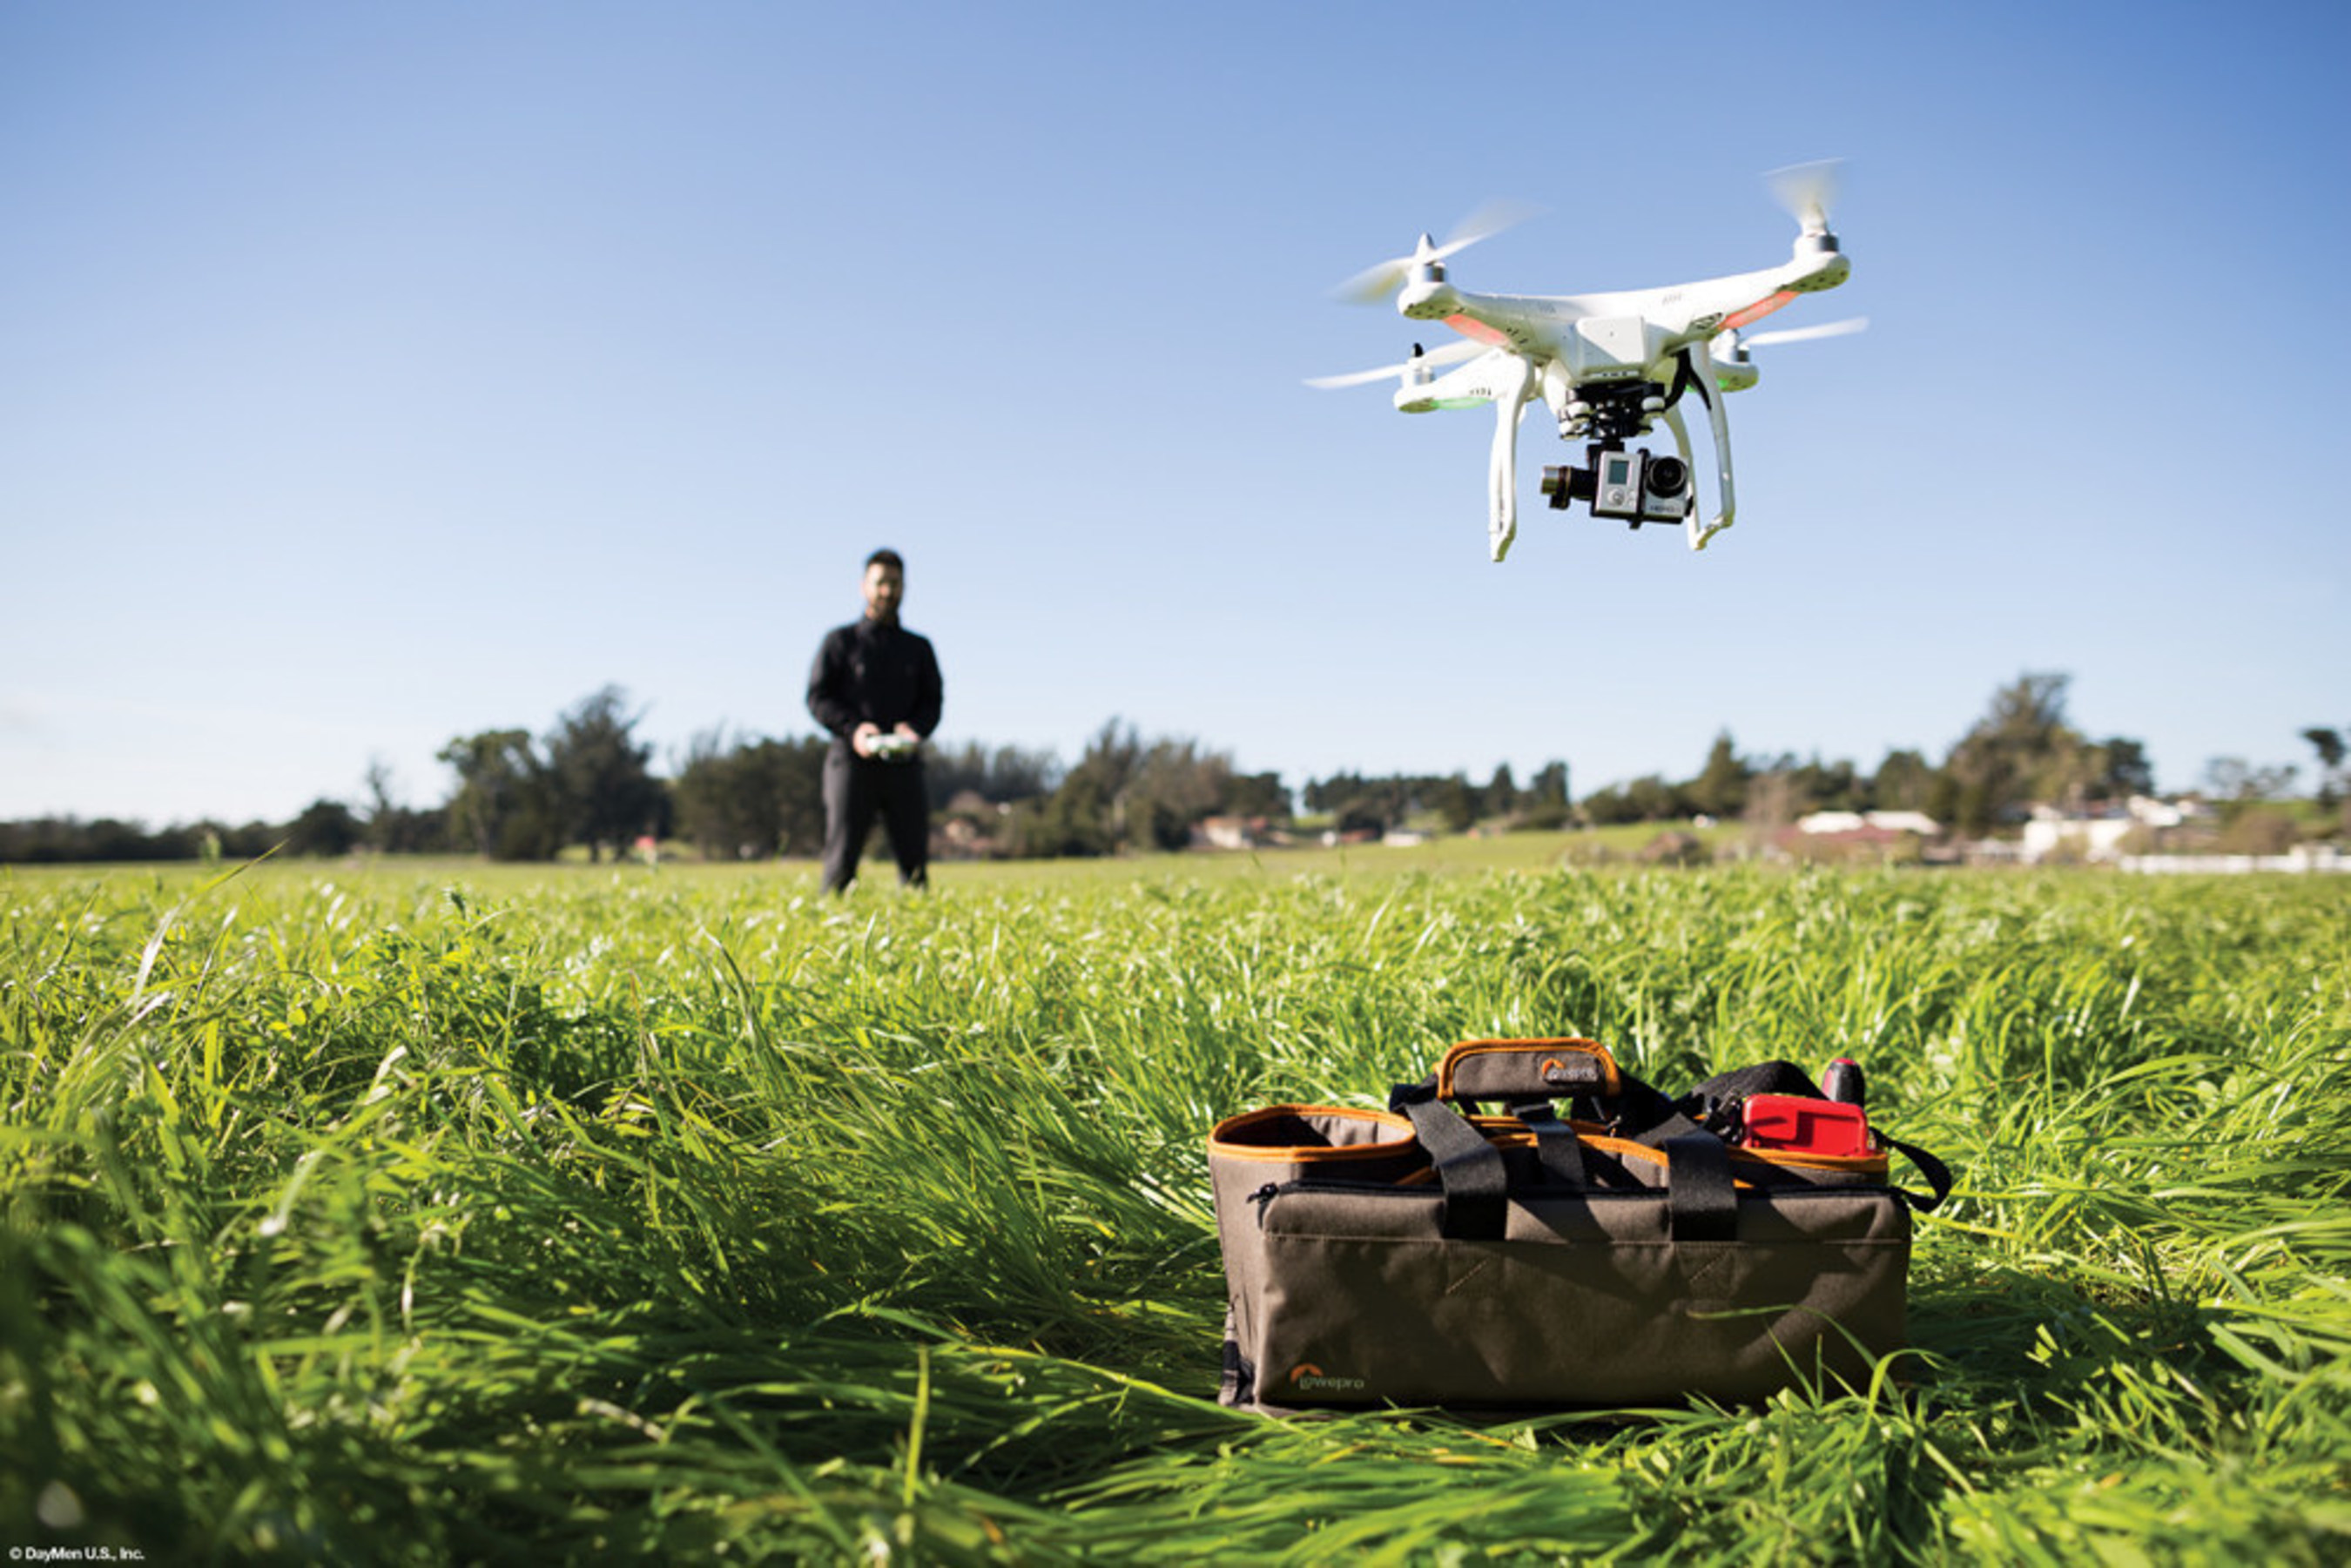 Lowepro's DroneGuard Kit provides trusted protection and portability for quadcopters.